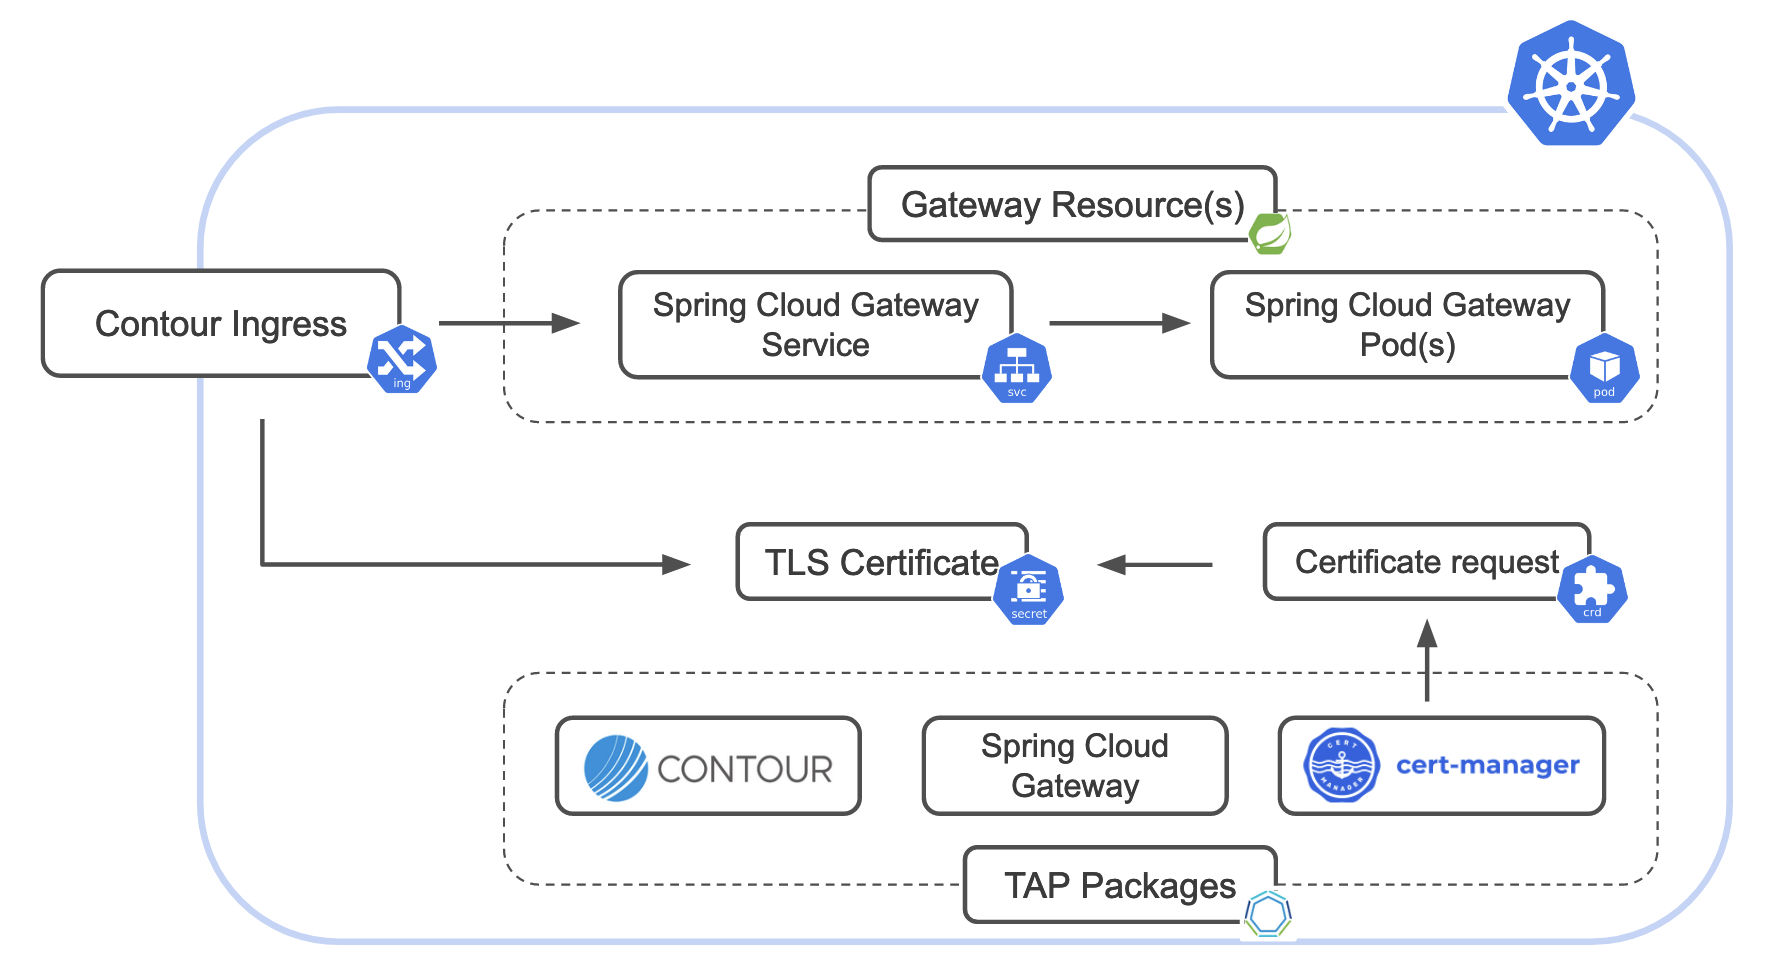 TLS certificate requests are routed from cert-manager in Contour in the TAP Packages.